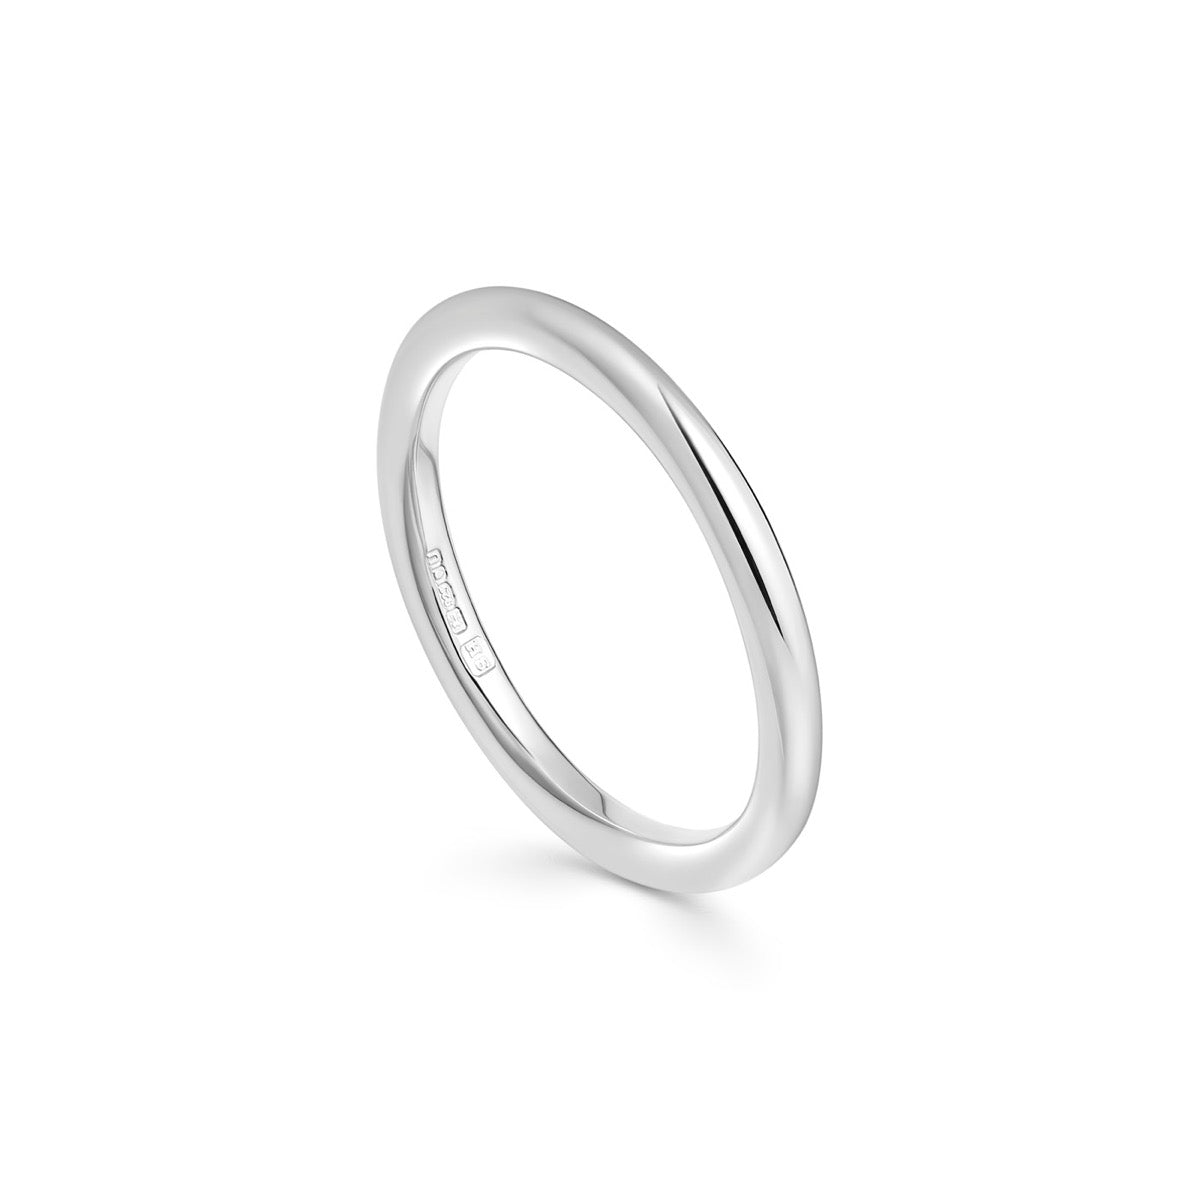 Deluxe Sterling Silver Halo Ring - 2mm